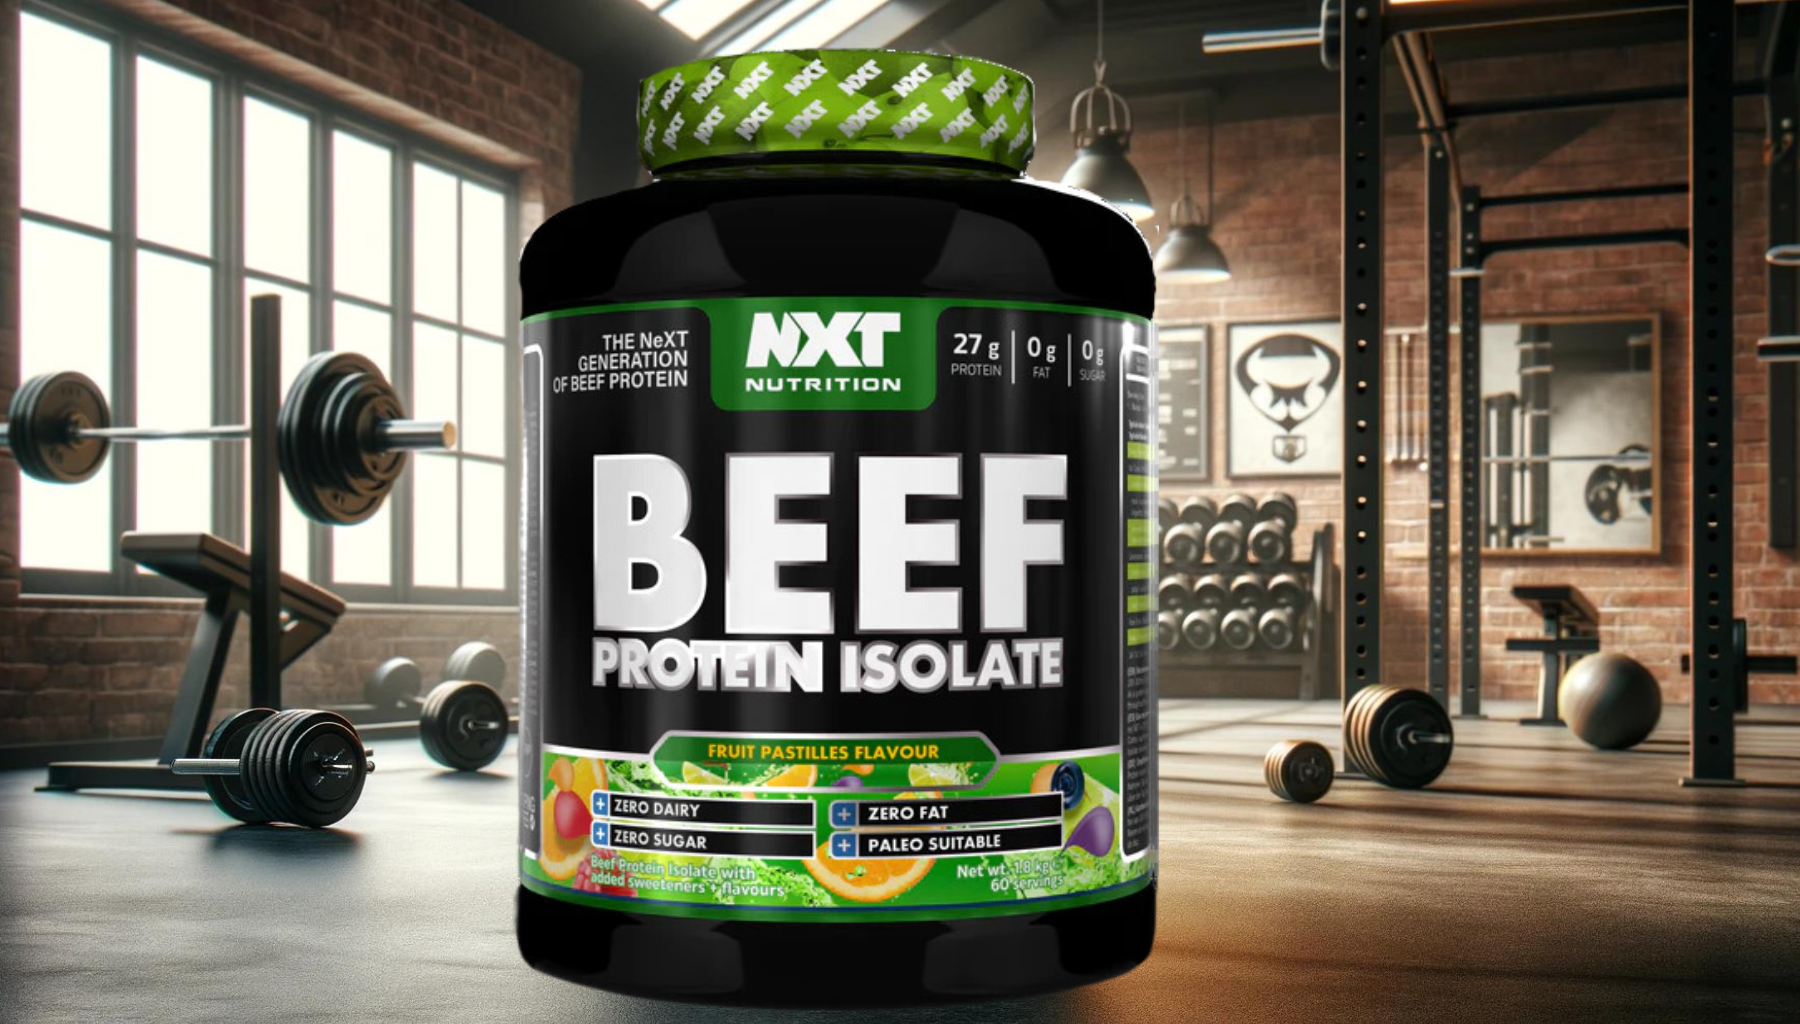 Ultimate Guide to NXT Nutrition Beef Protein Isolate 1.8kg: Benefits, Ingredients, and FAQs